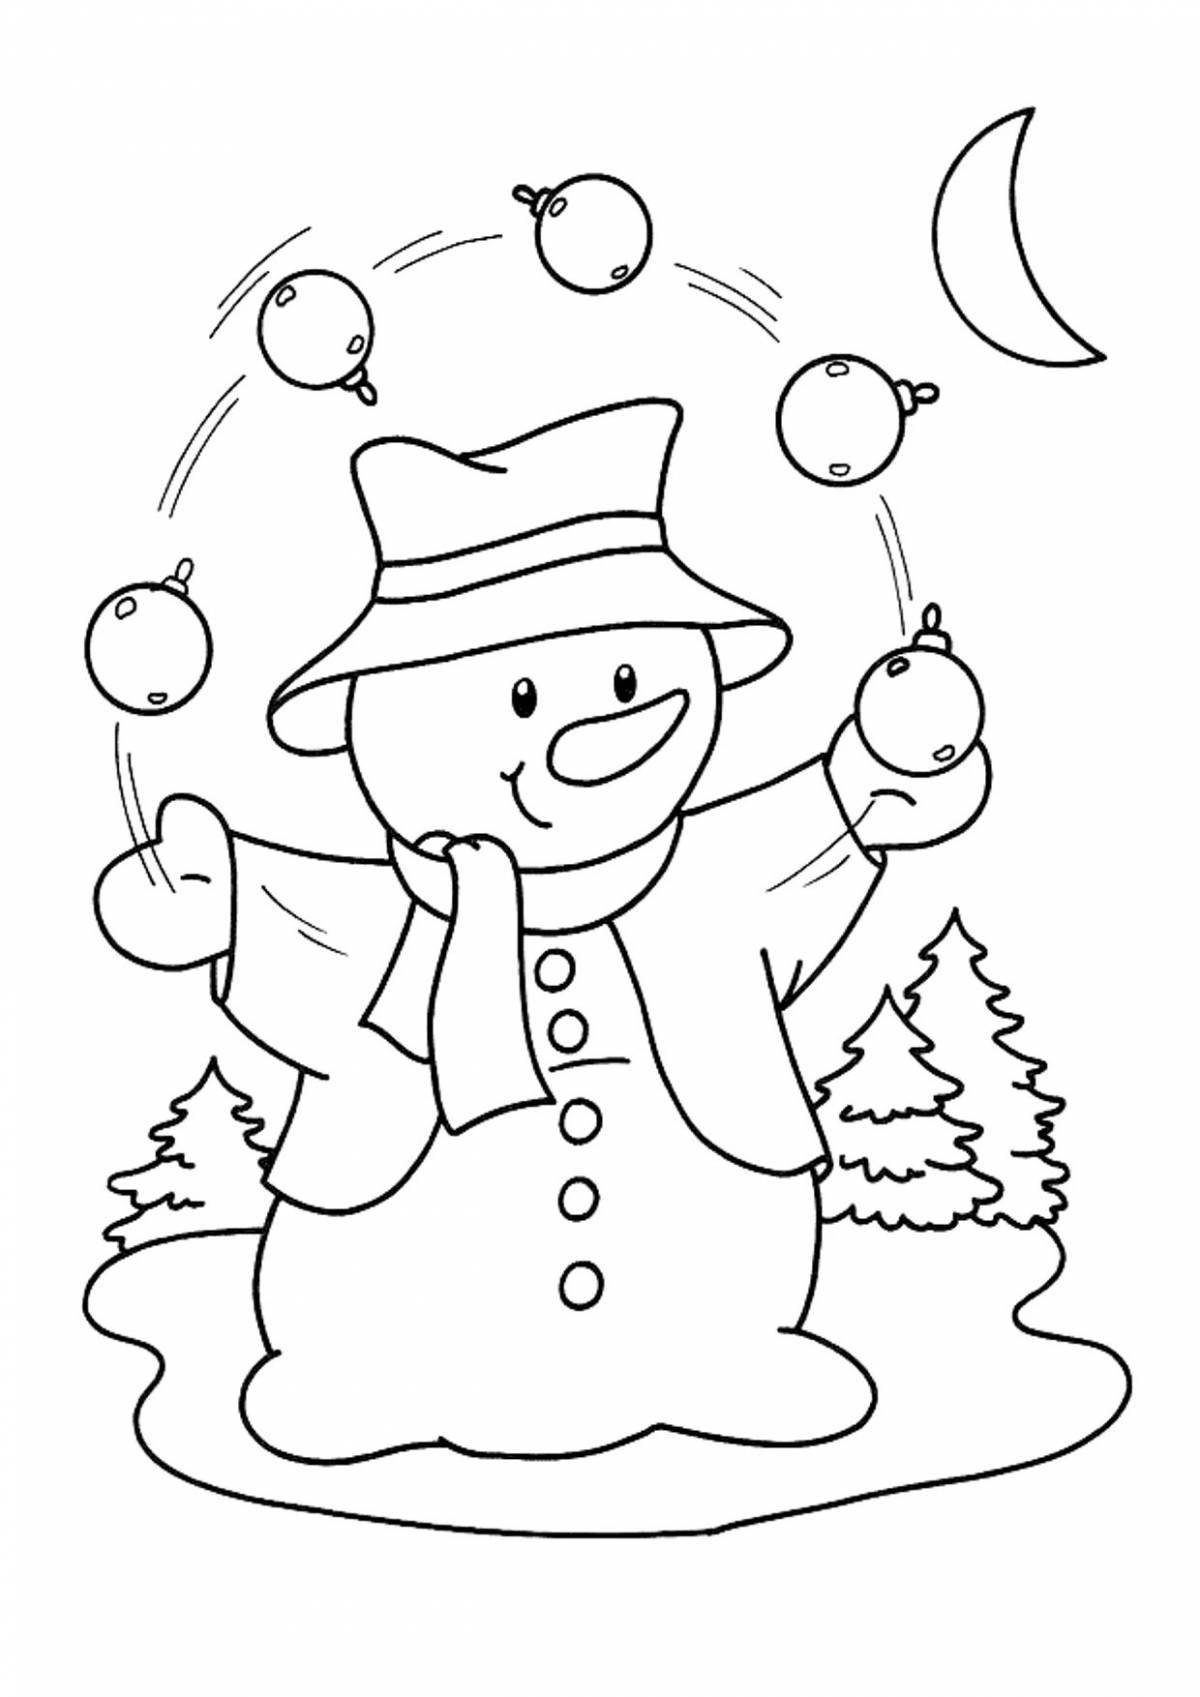 A fun drawing of a snowman for kids